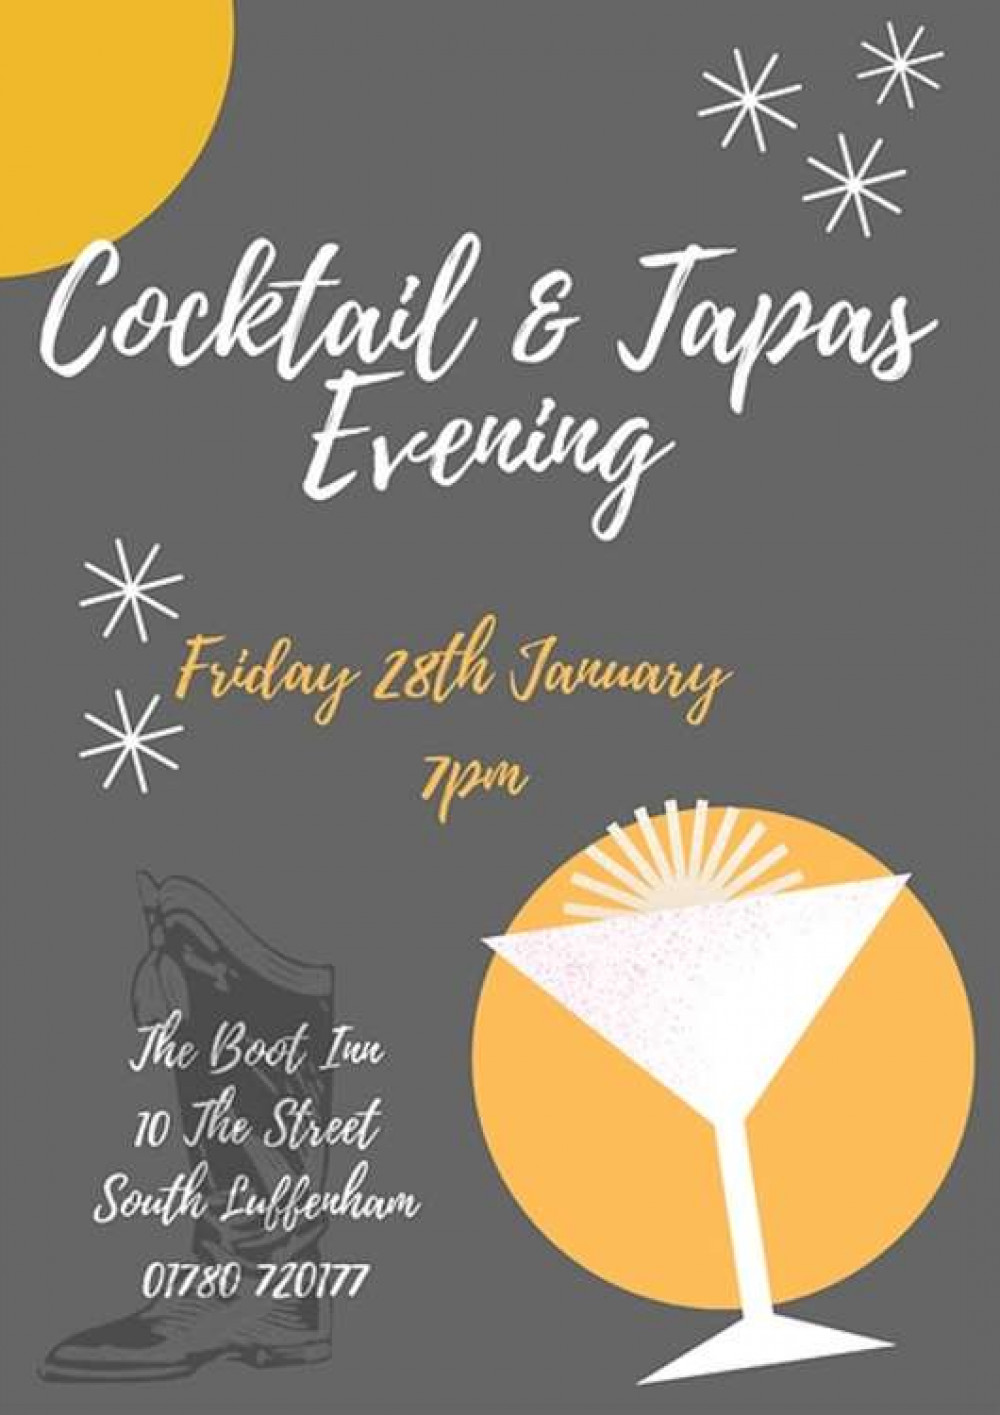 Cocktail and Tapas flyer from The Boot Inn, South Luffenham (photo credit: The Boot Inn)